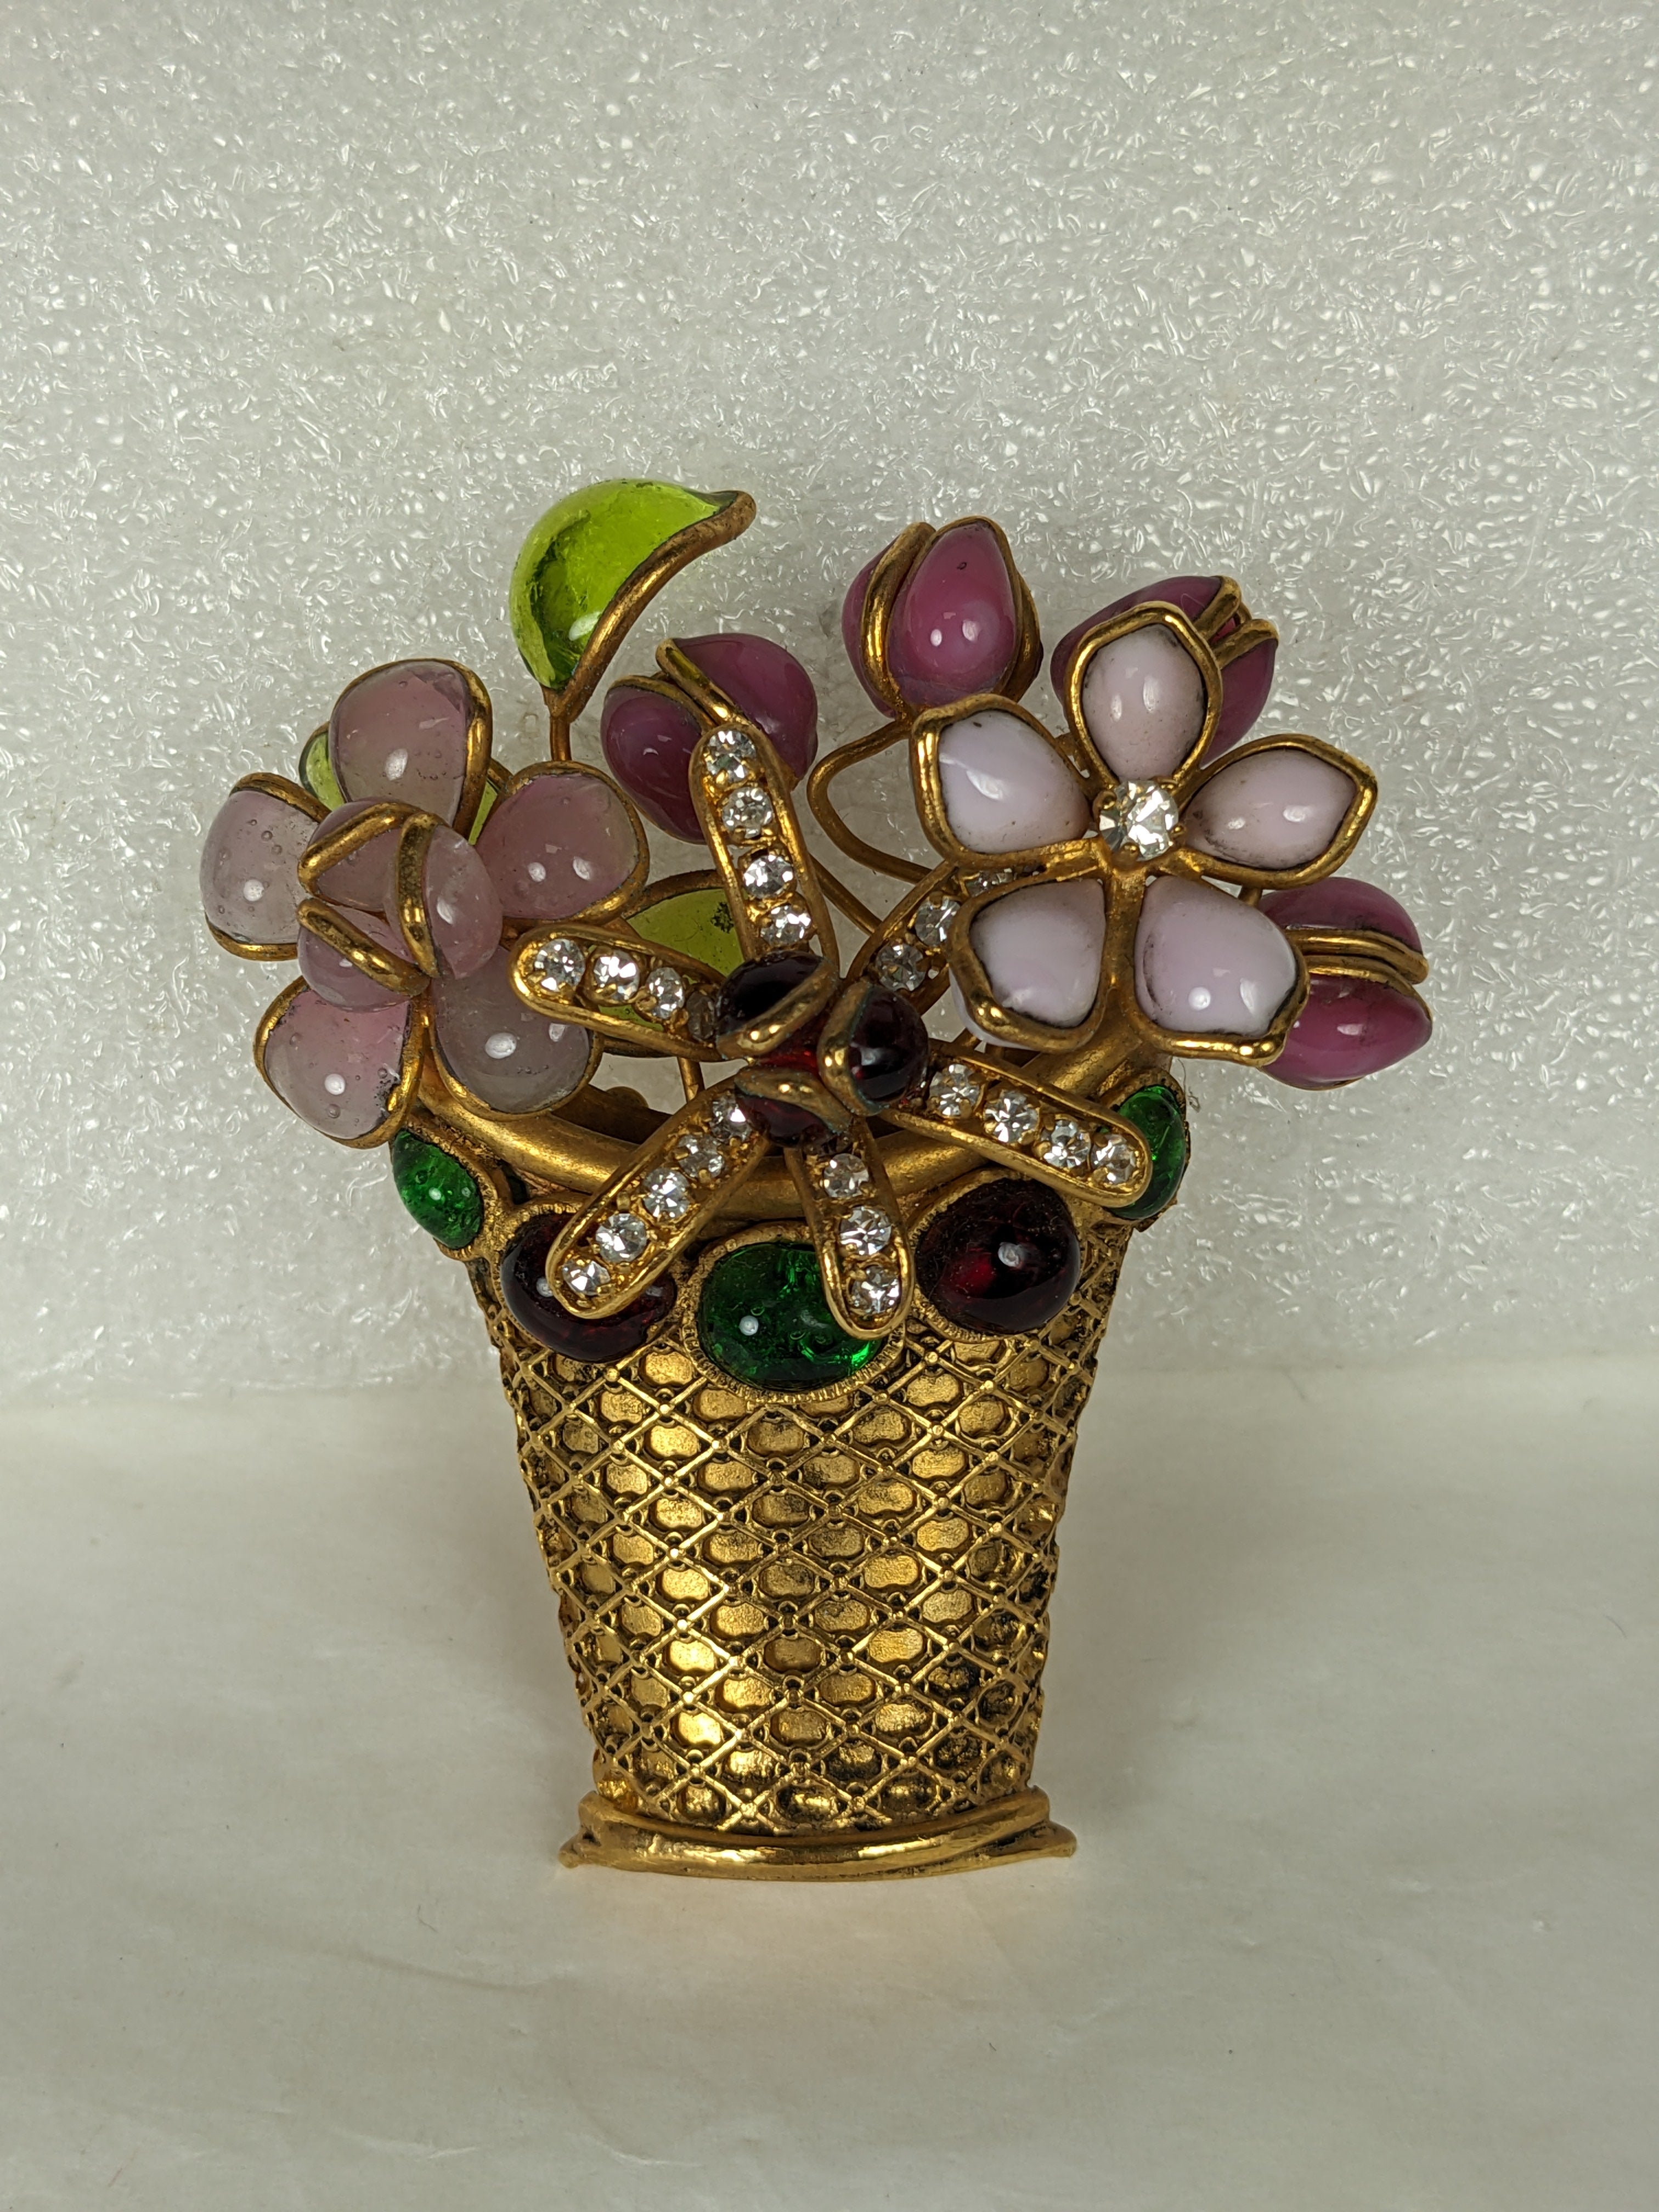 Rare and unusual Maison Gripoix Flower Basket Brooch from the 1950's. Crafted in a manner no longer possible with various blooms of hand made poured glass set in a filigree basket with jeweled ruby and emerald paste cabochon borders. Extraordinary